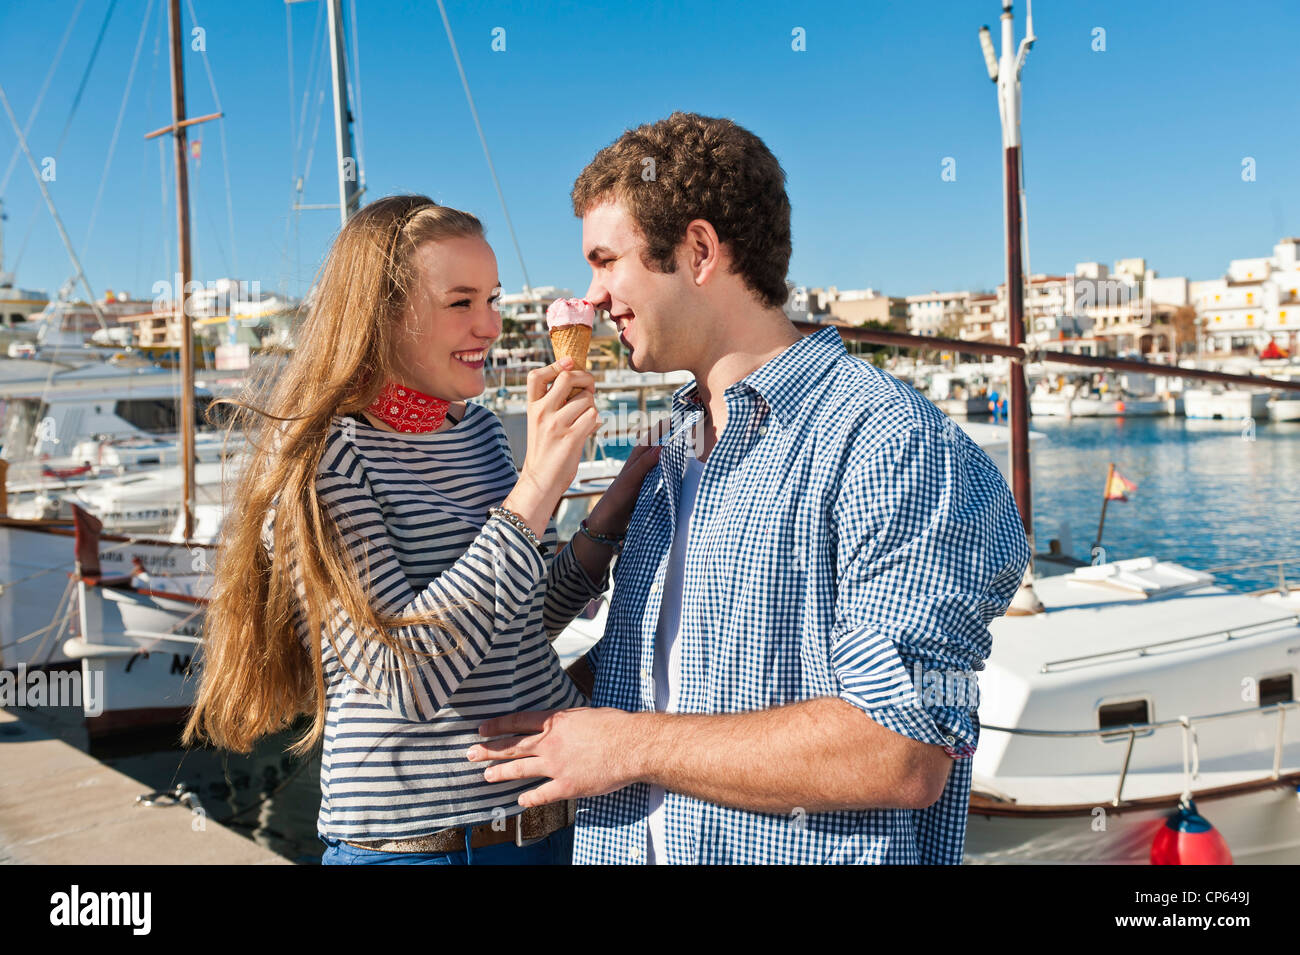 Spain, Mallorca, Couple eating ice cream at harbour, smiling Stock Photo